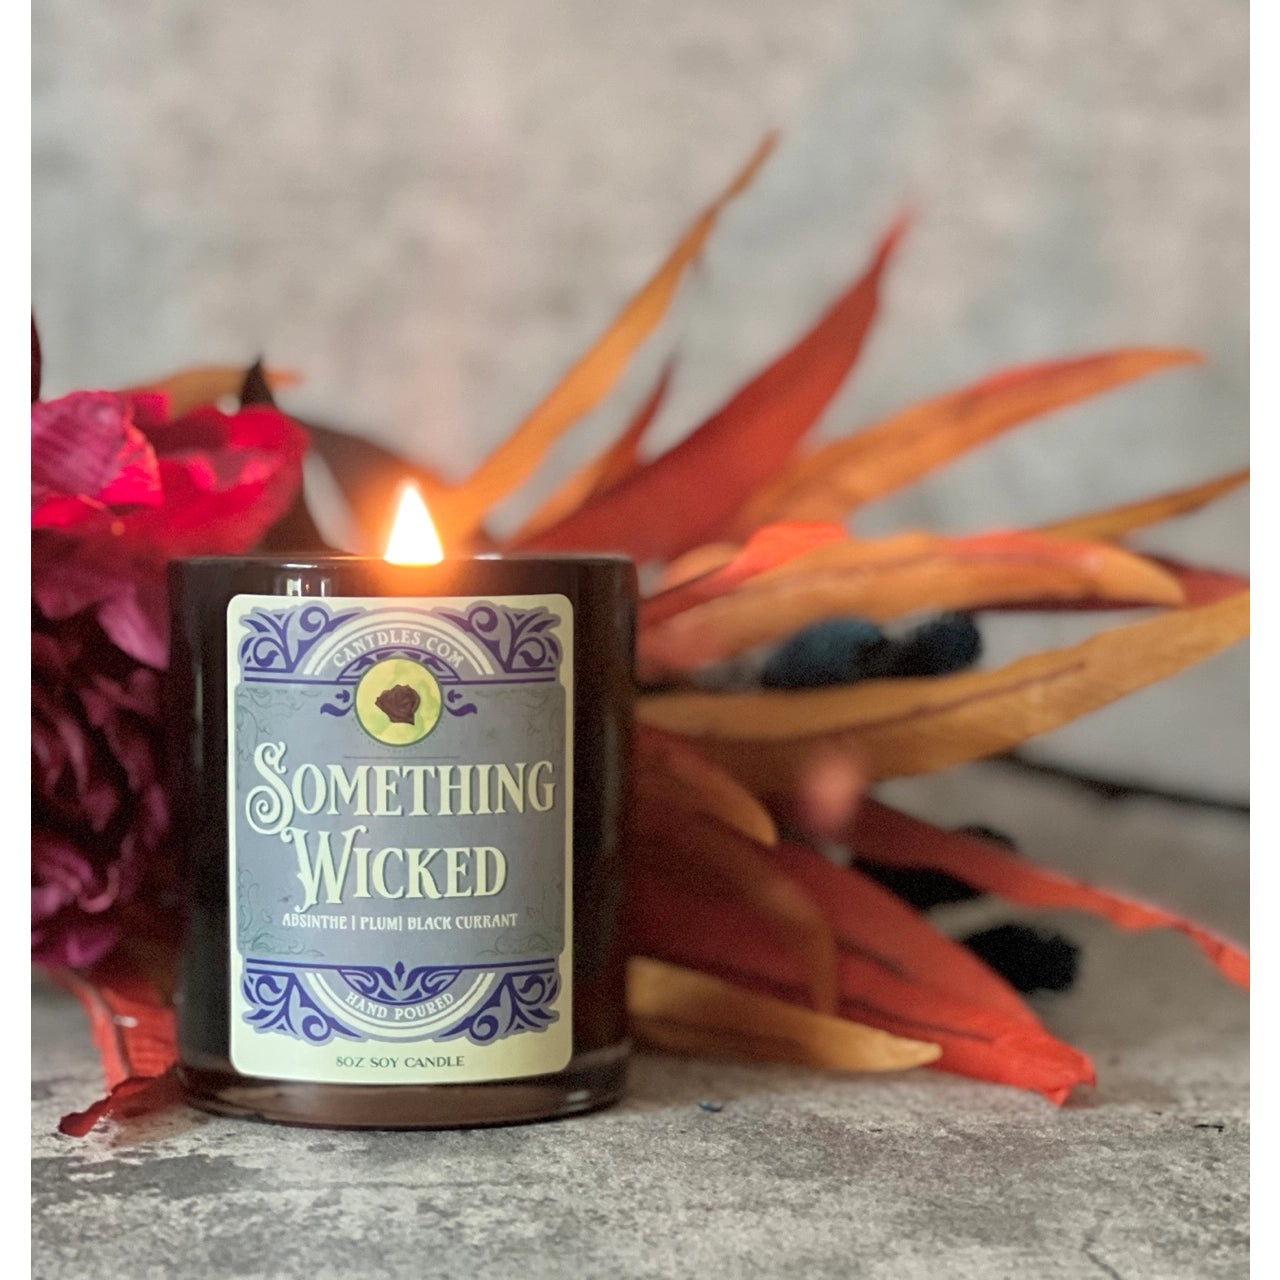 Date Night Soy Candle, Crackling Wood Wick